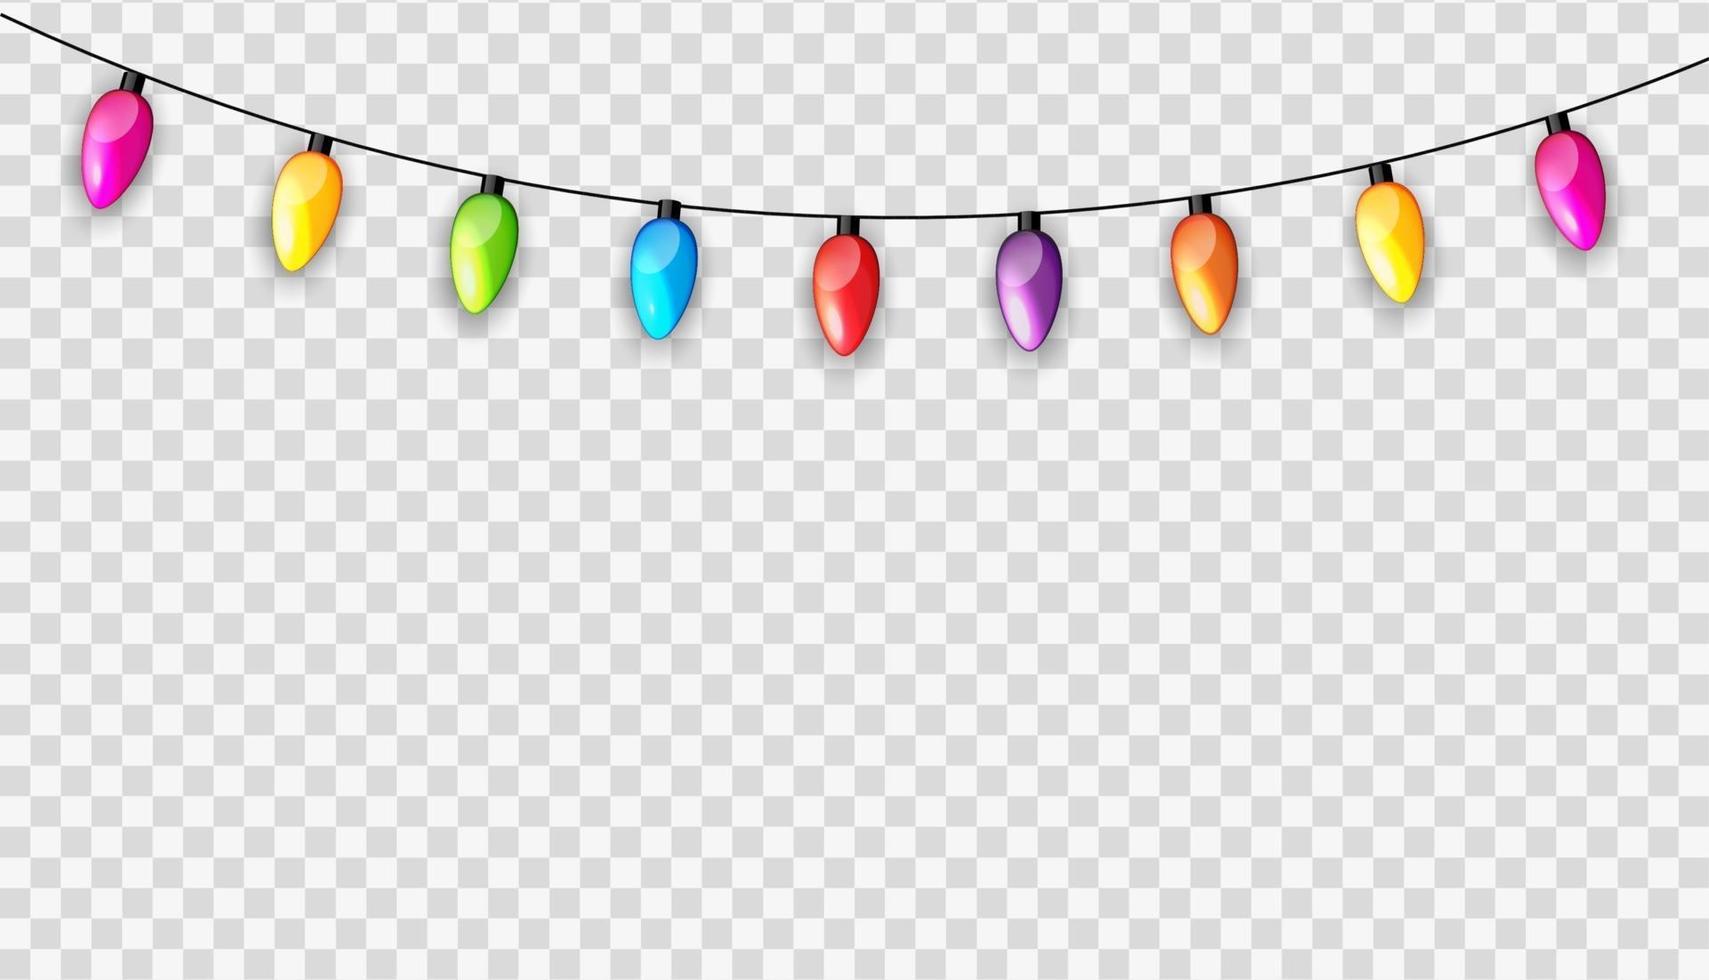 Multicolored Garland Lamp Bulbs Festive Isolated on Transparent Background Vector Illustration